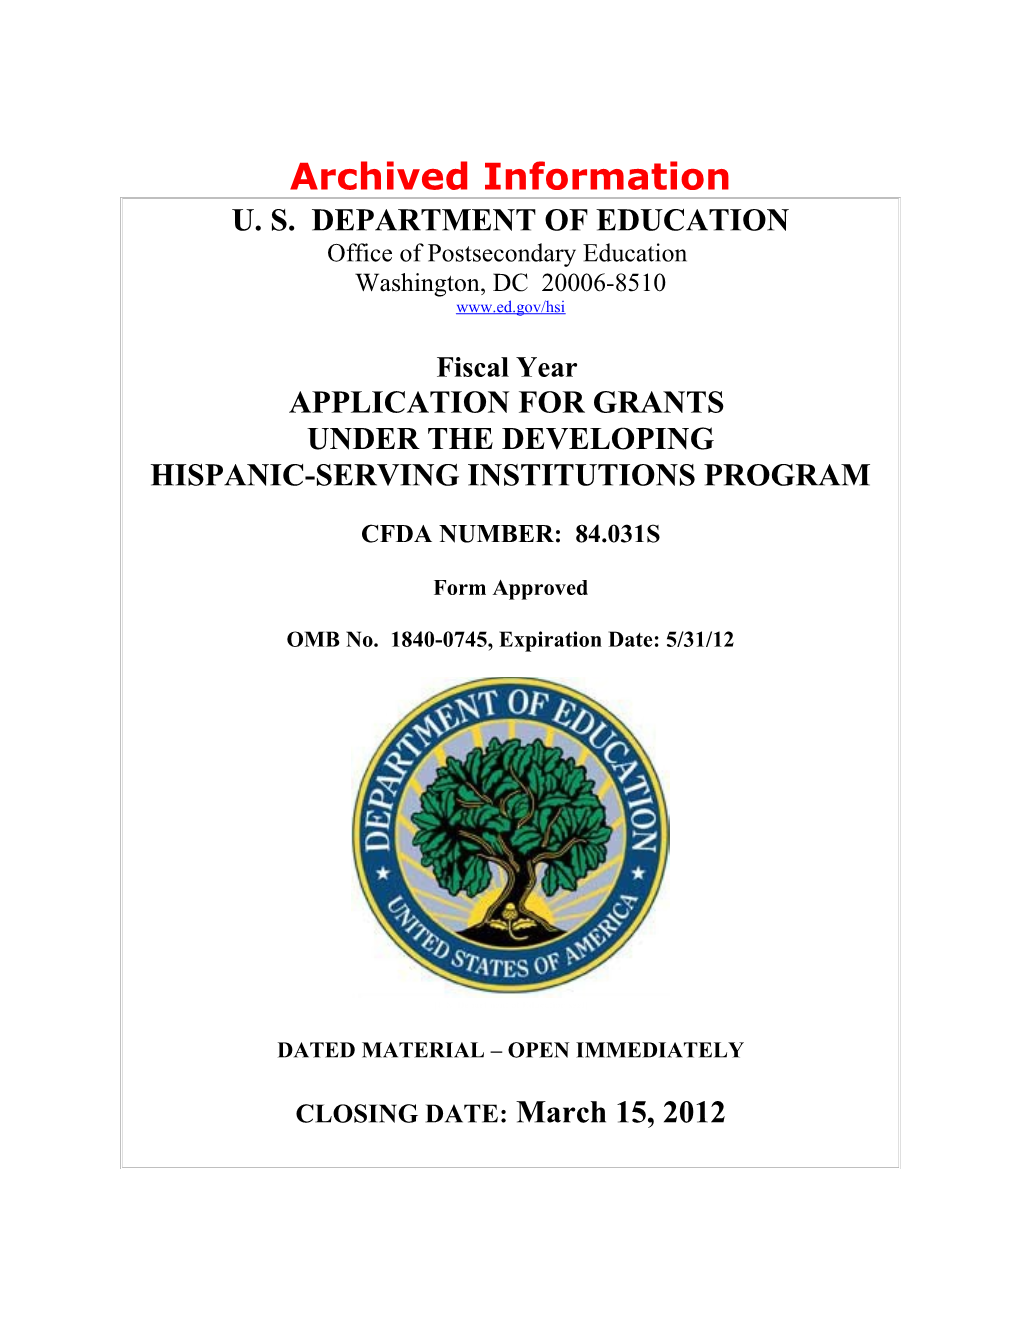 Archived: FY 2012 Application for Grants Under the Developing Hispanic-Serving Institutions